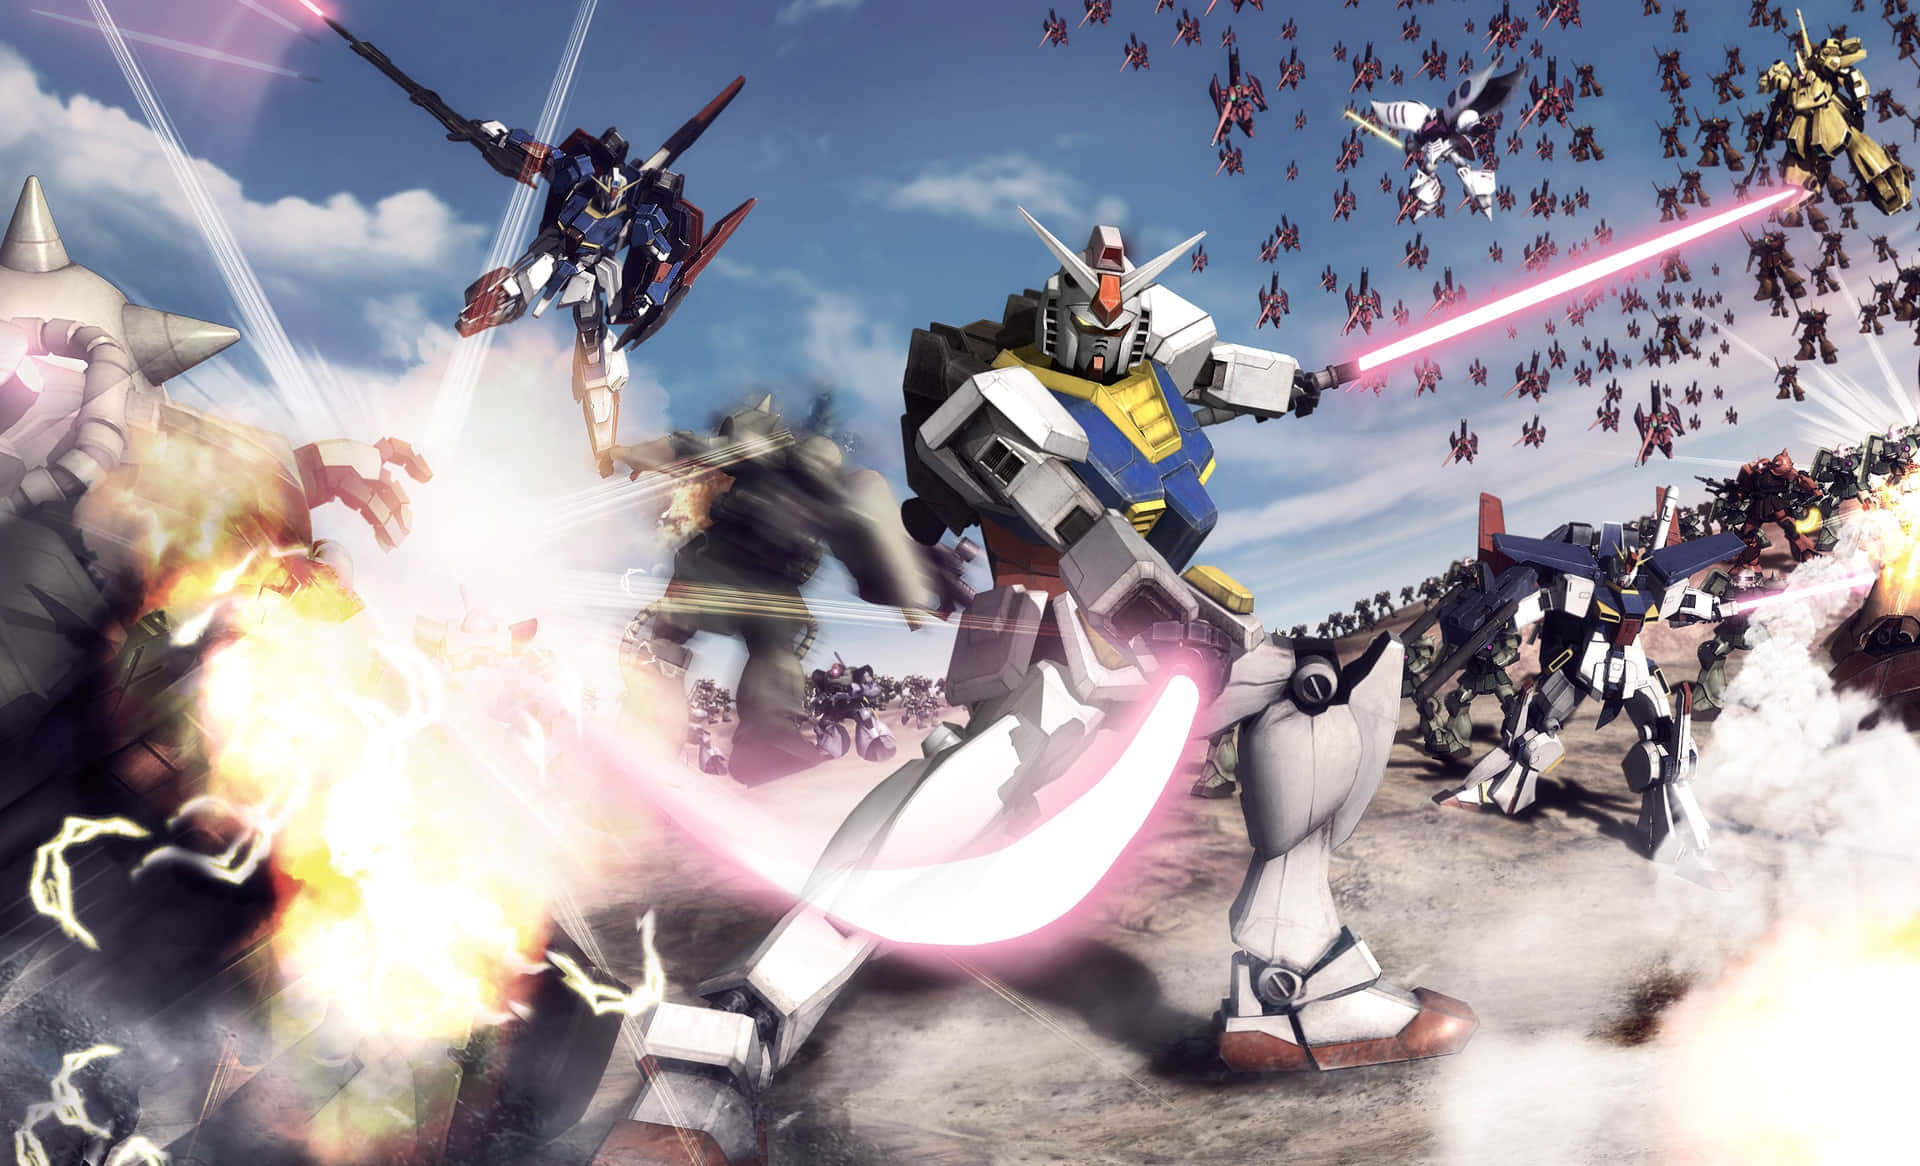 Mobile Suit Gundam fighting for Justice